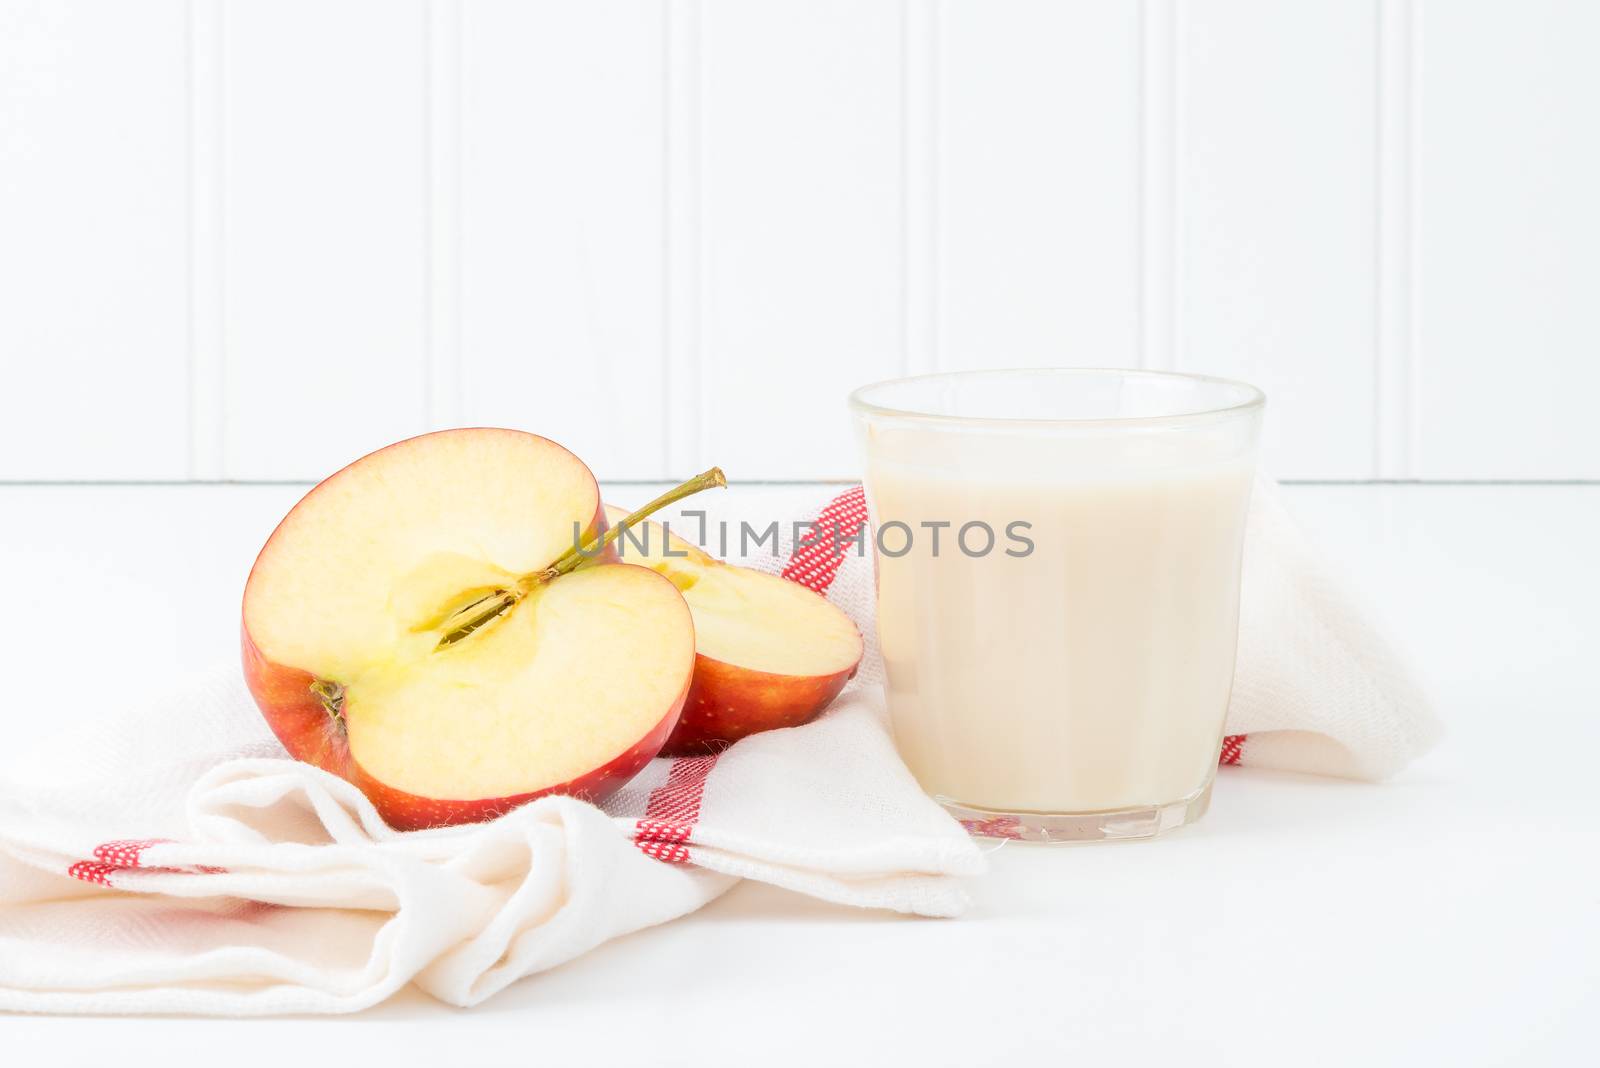 Snack of sliced fresh red apple and a glass of cold milk.